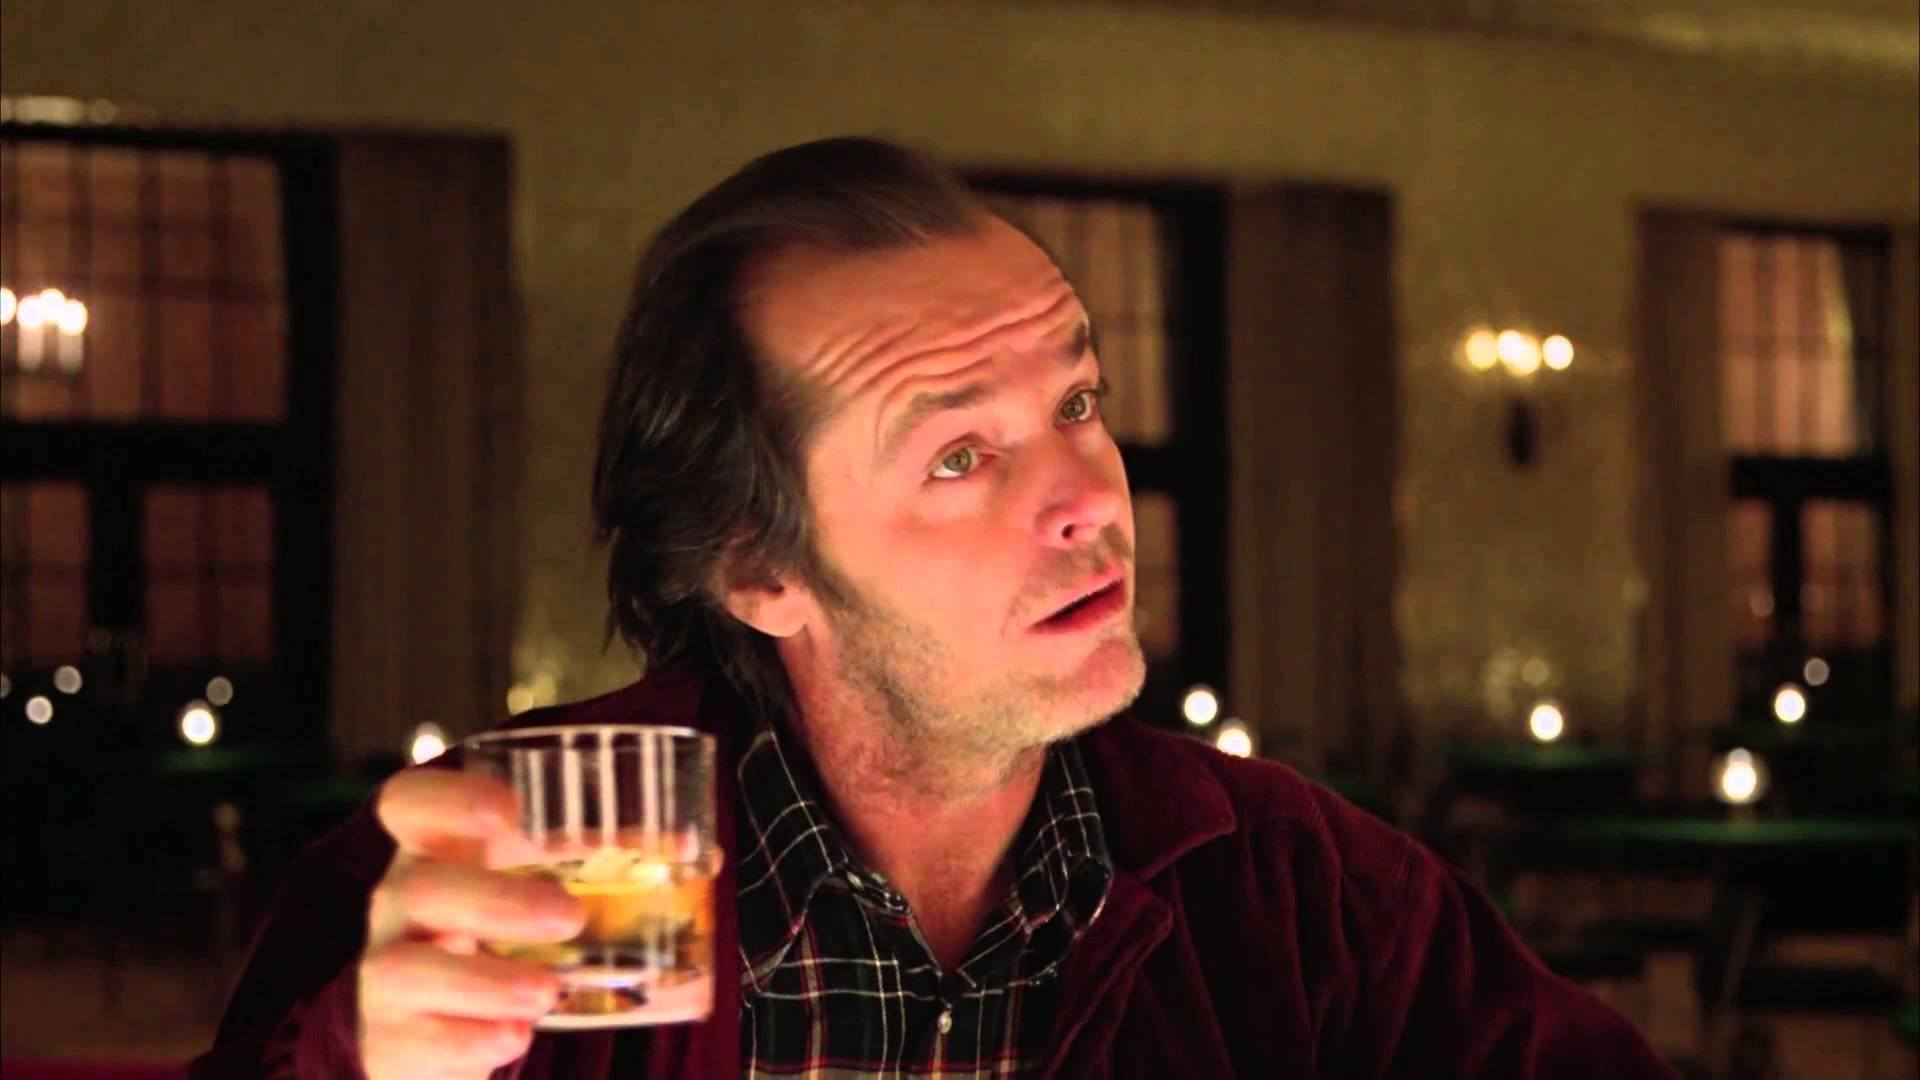 FandangoNOW Celebrates 40 Years of ‘The Shining’ with a Stephen King & Stanley Kubrick Sale